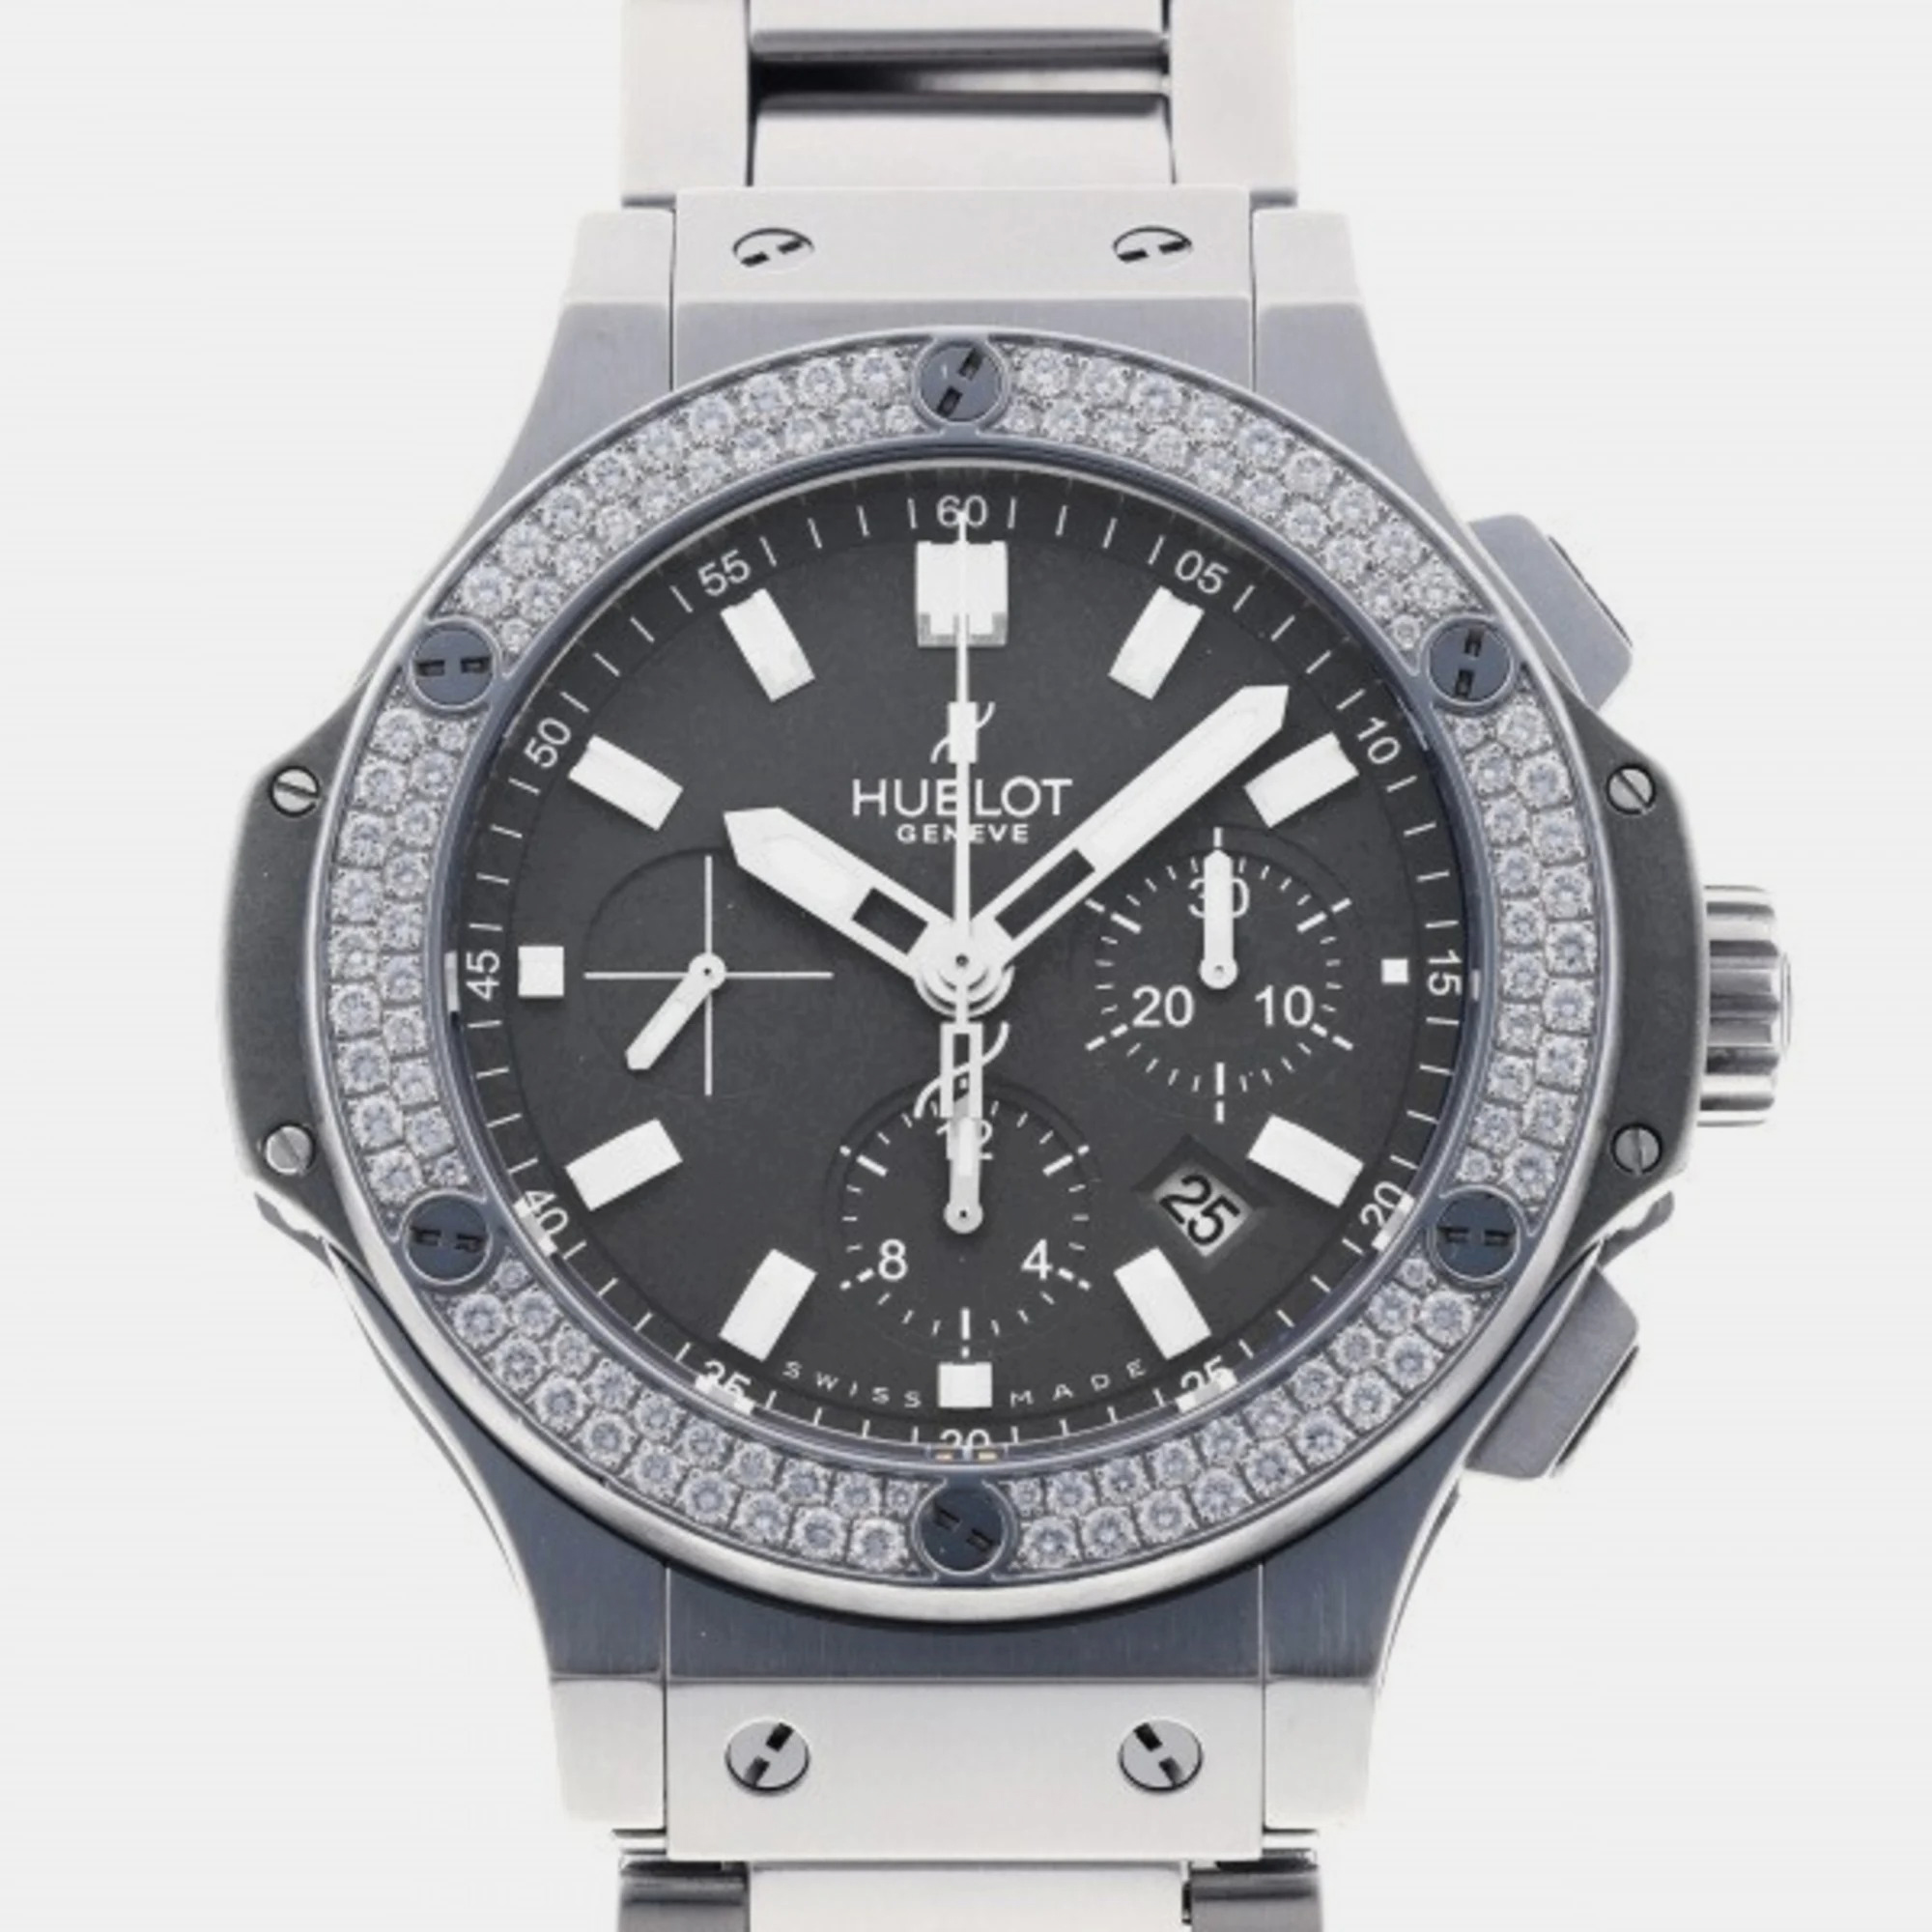 Let this fine Hublot wristwatch accompany you with ease and luxurious style. Beautifully crafted using the best quality materials this authentic branded watch is built to be a standout accessory for your wrist.